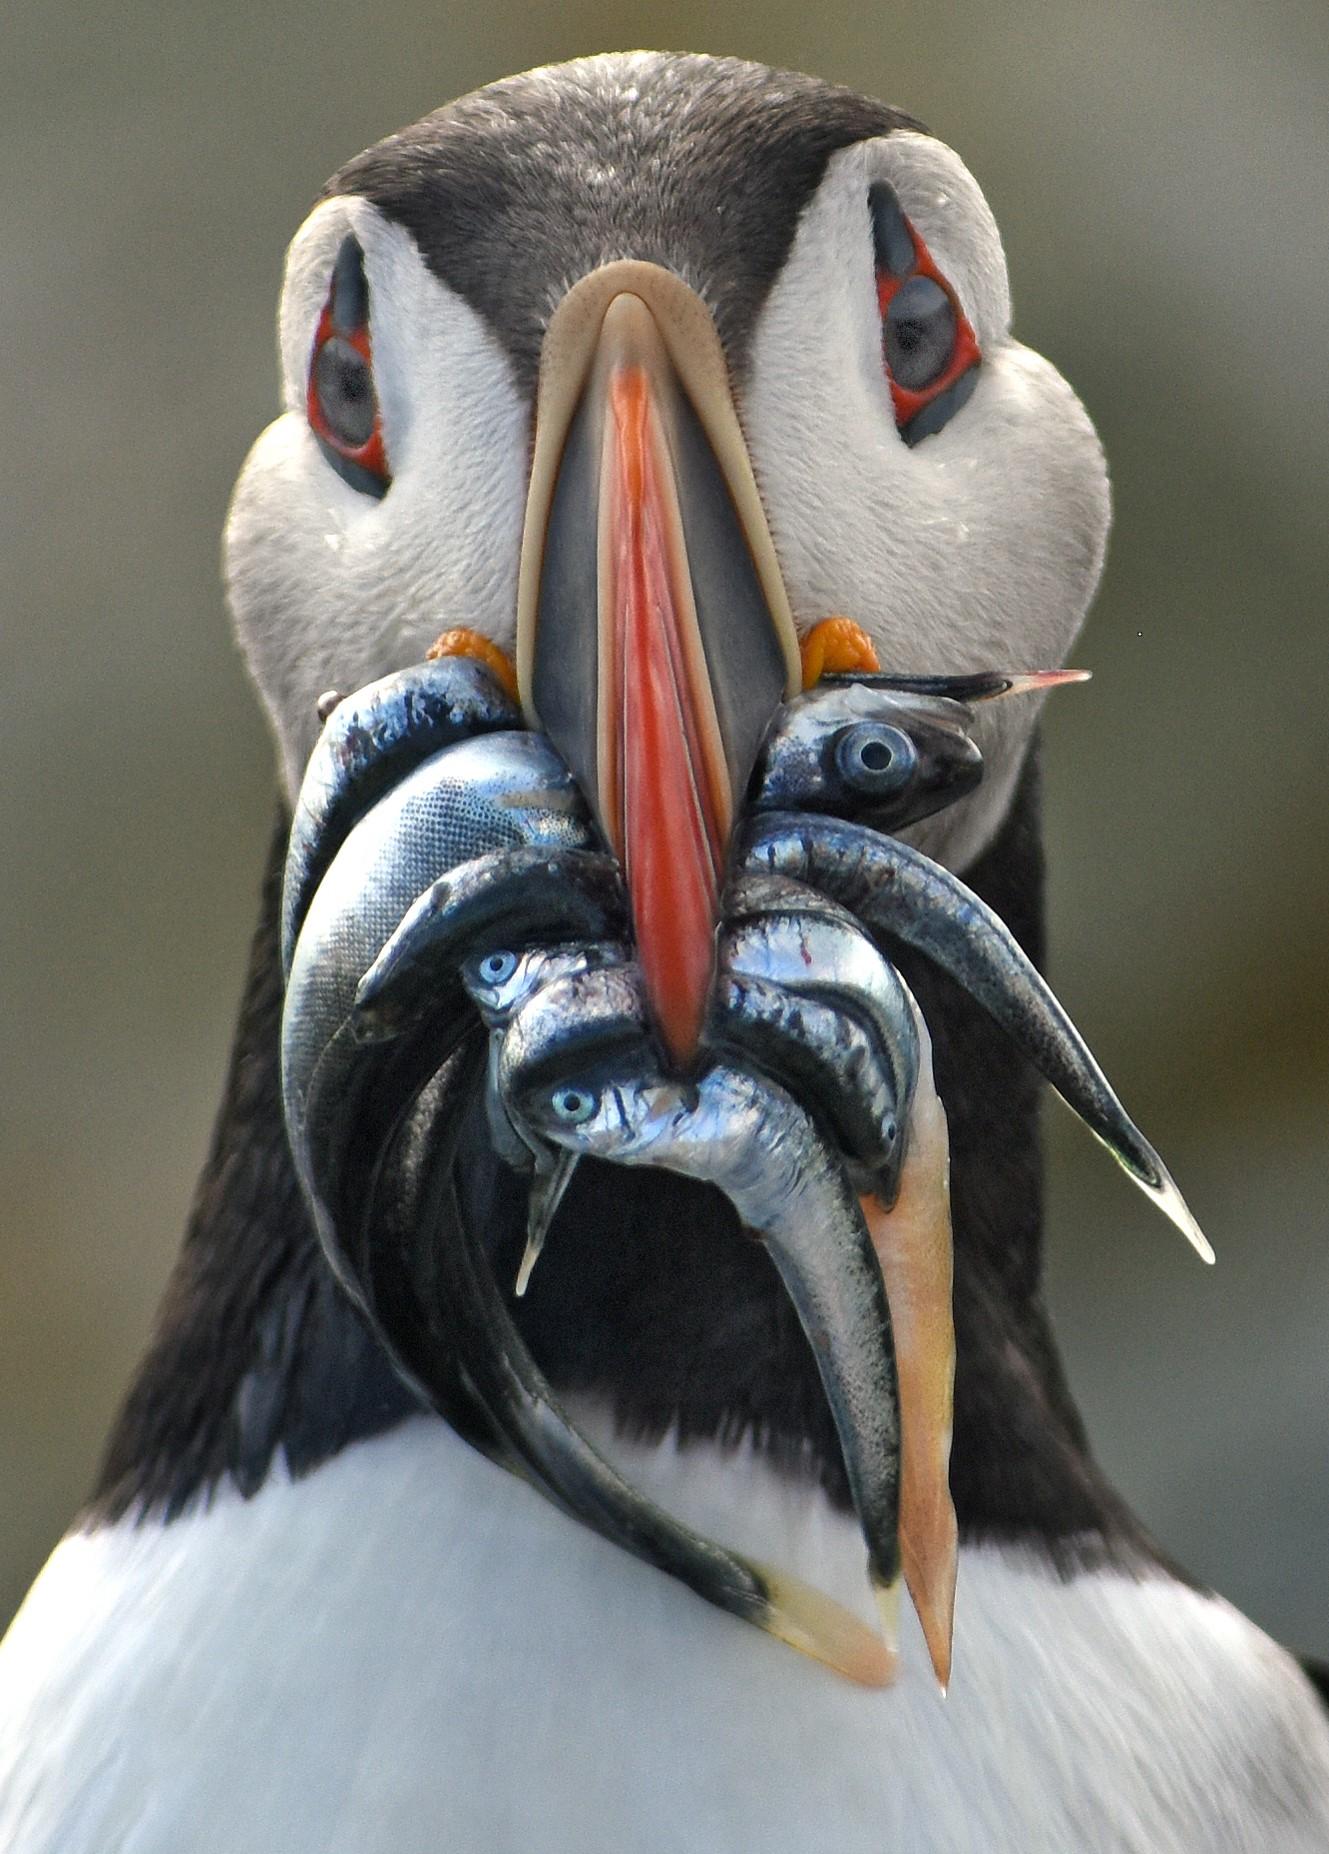 A close shot of a puffin with fish in its mouth.